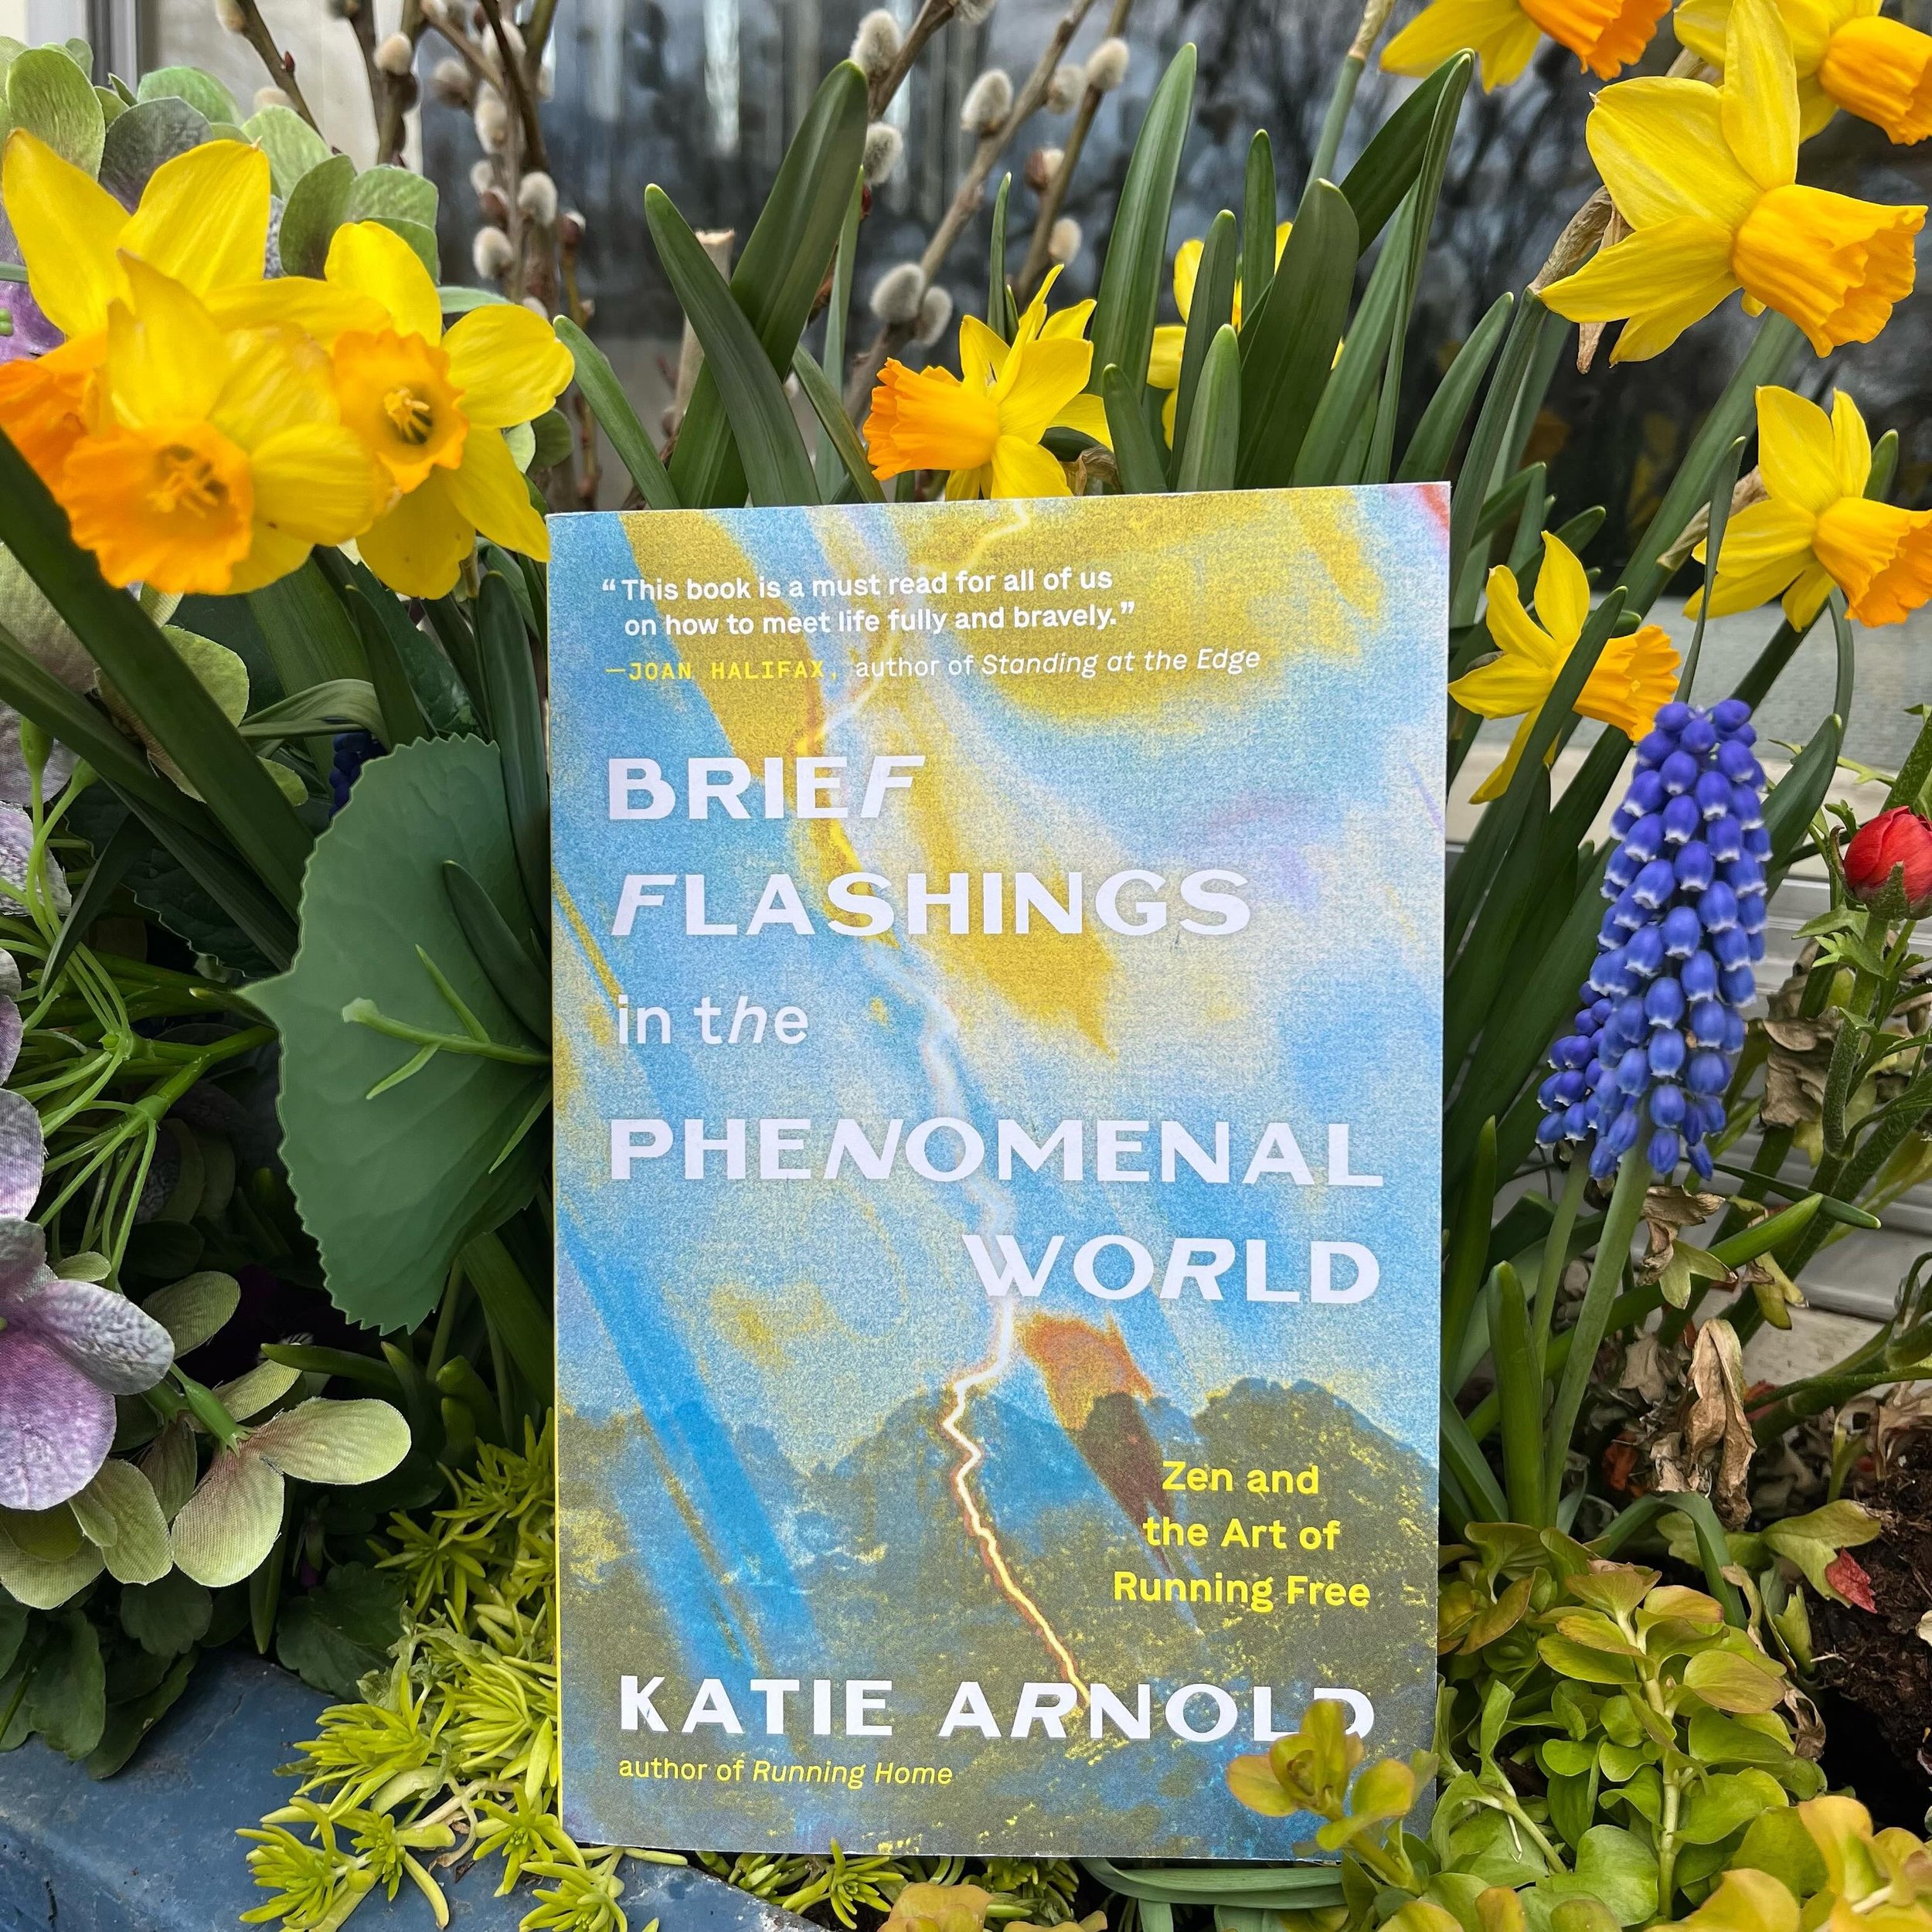 I devoured this book over the weekend (not v zen of me oops) and my heart is still blooming with tenderness. As an oft-overwhelmed new mom, it was just what I needed. ⚡️❤️ @katiearnold is a brilliant teacher without ever being didactic, sharing her w